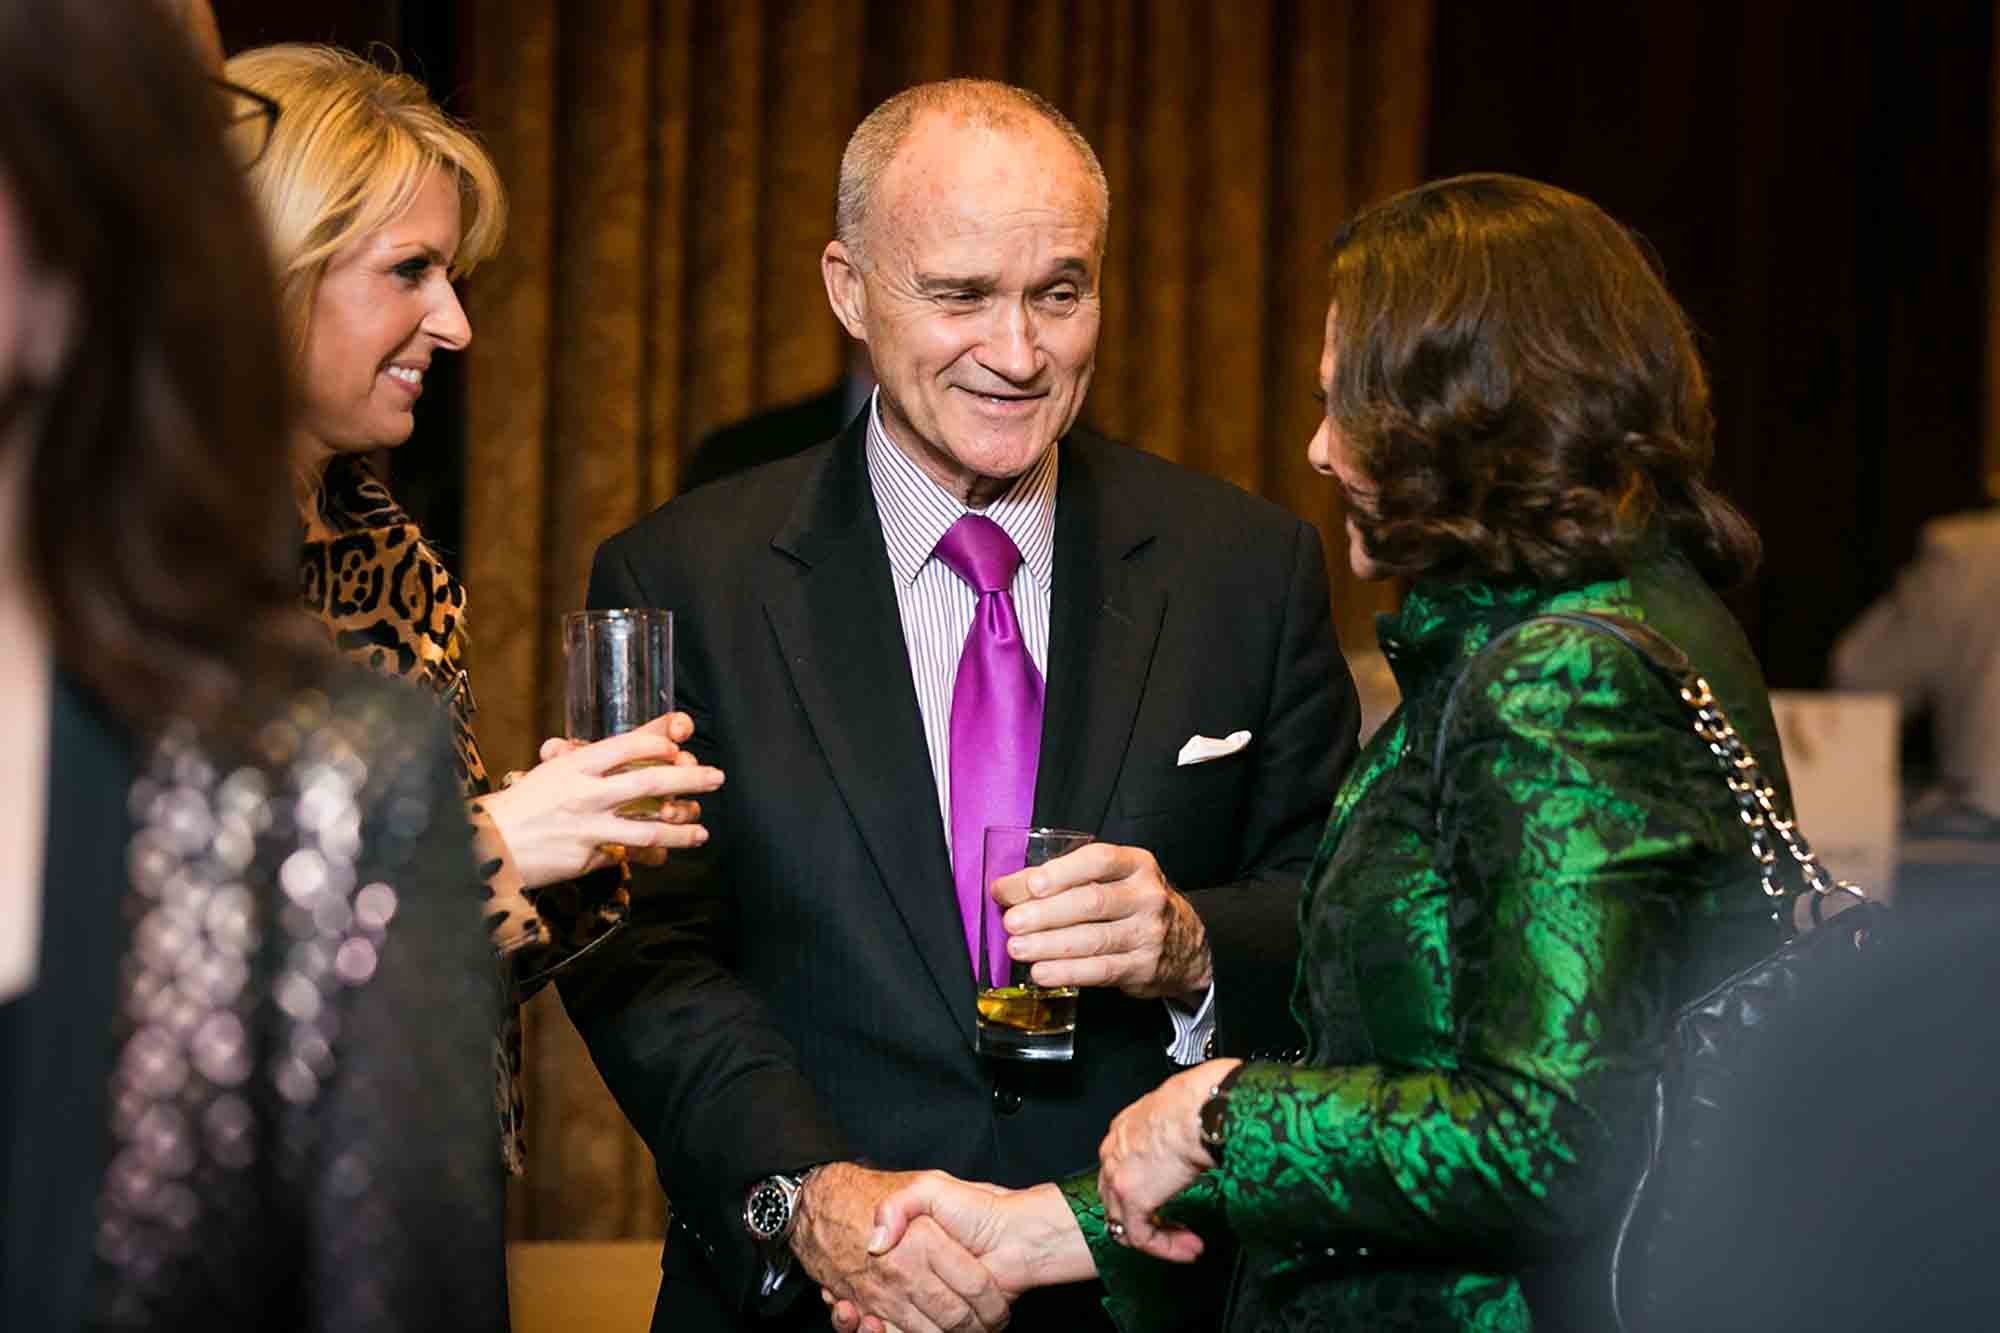 Former NYPD Police Commissioner, Ray Kelly, shaking hands at an event by San Antonio corporate event photographer, Kelly Williams (Copy)